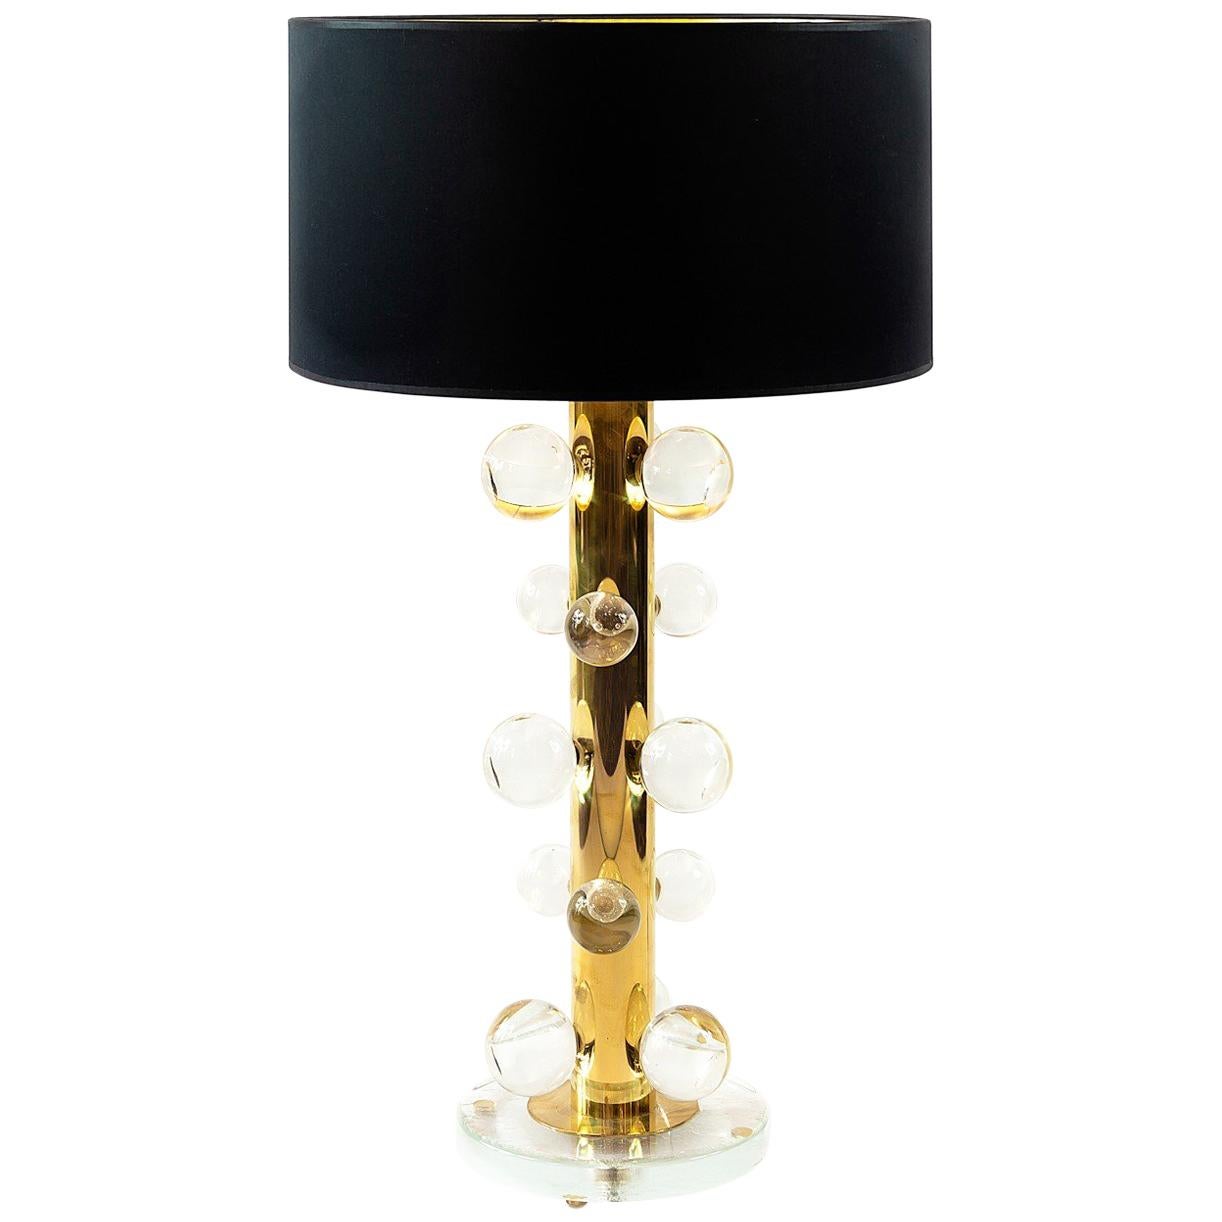 This pair of Italian table lamps are designed in solid brass and glass base.
They are decorated with transparent Murano glass details. 
New made satin finish black color textile shades are with gold inside.
Each lamp is heavy and solid.

 